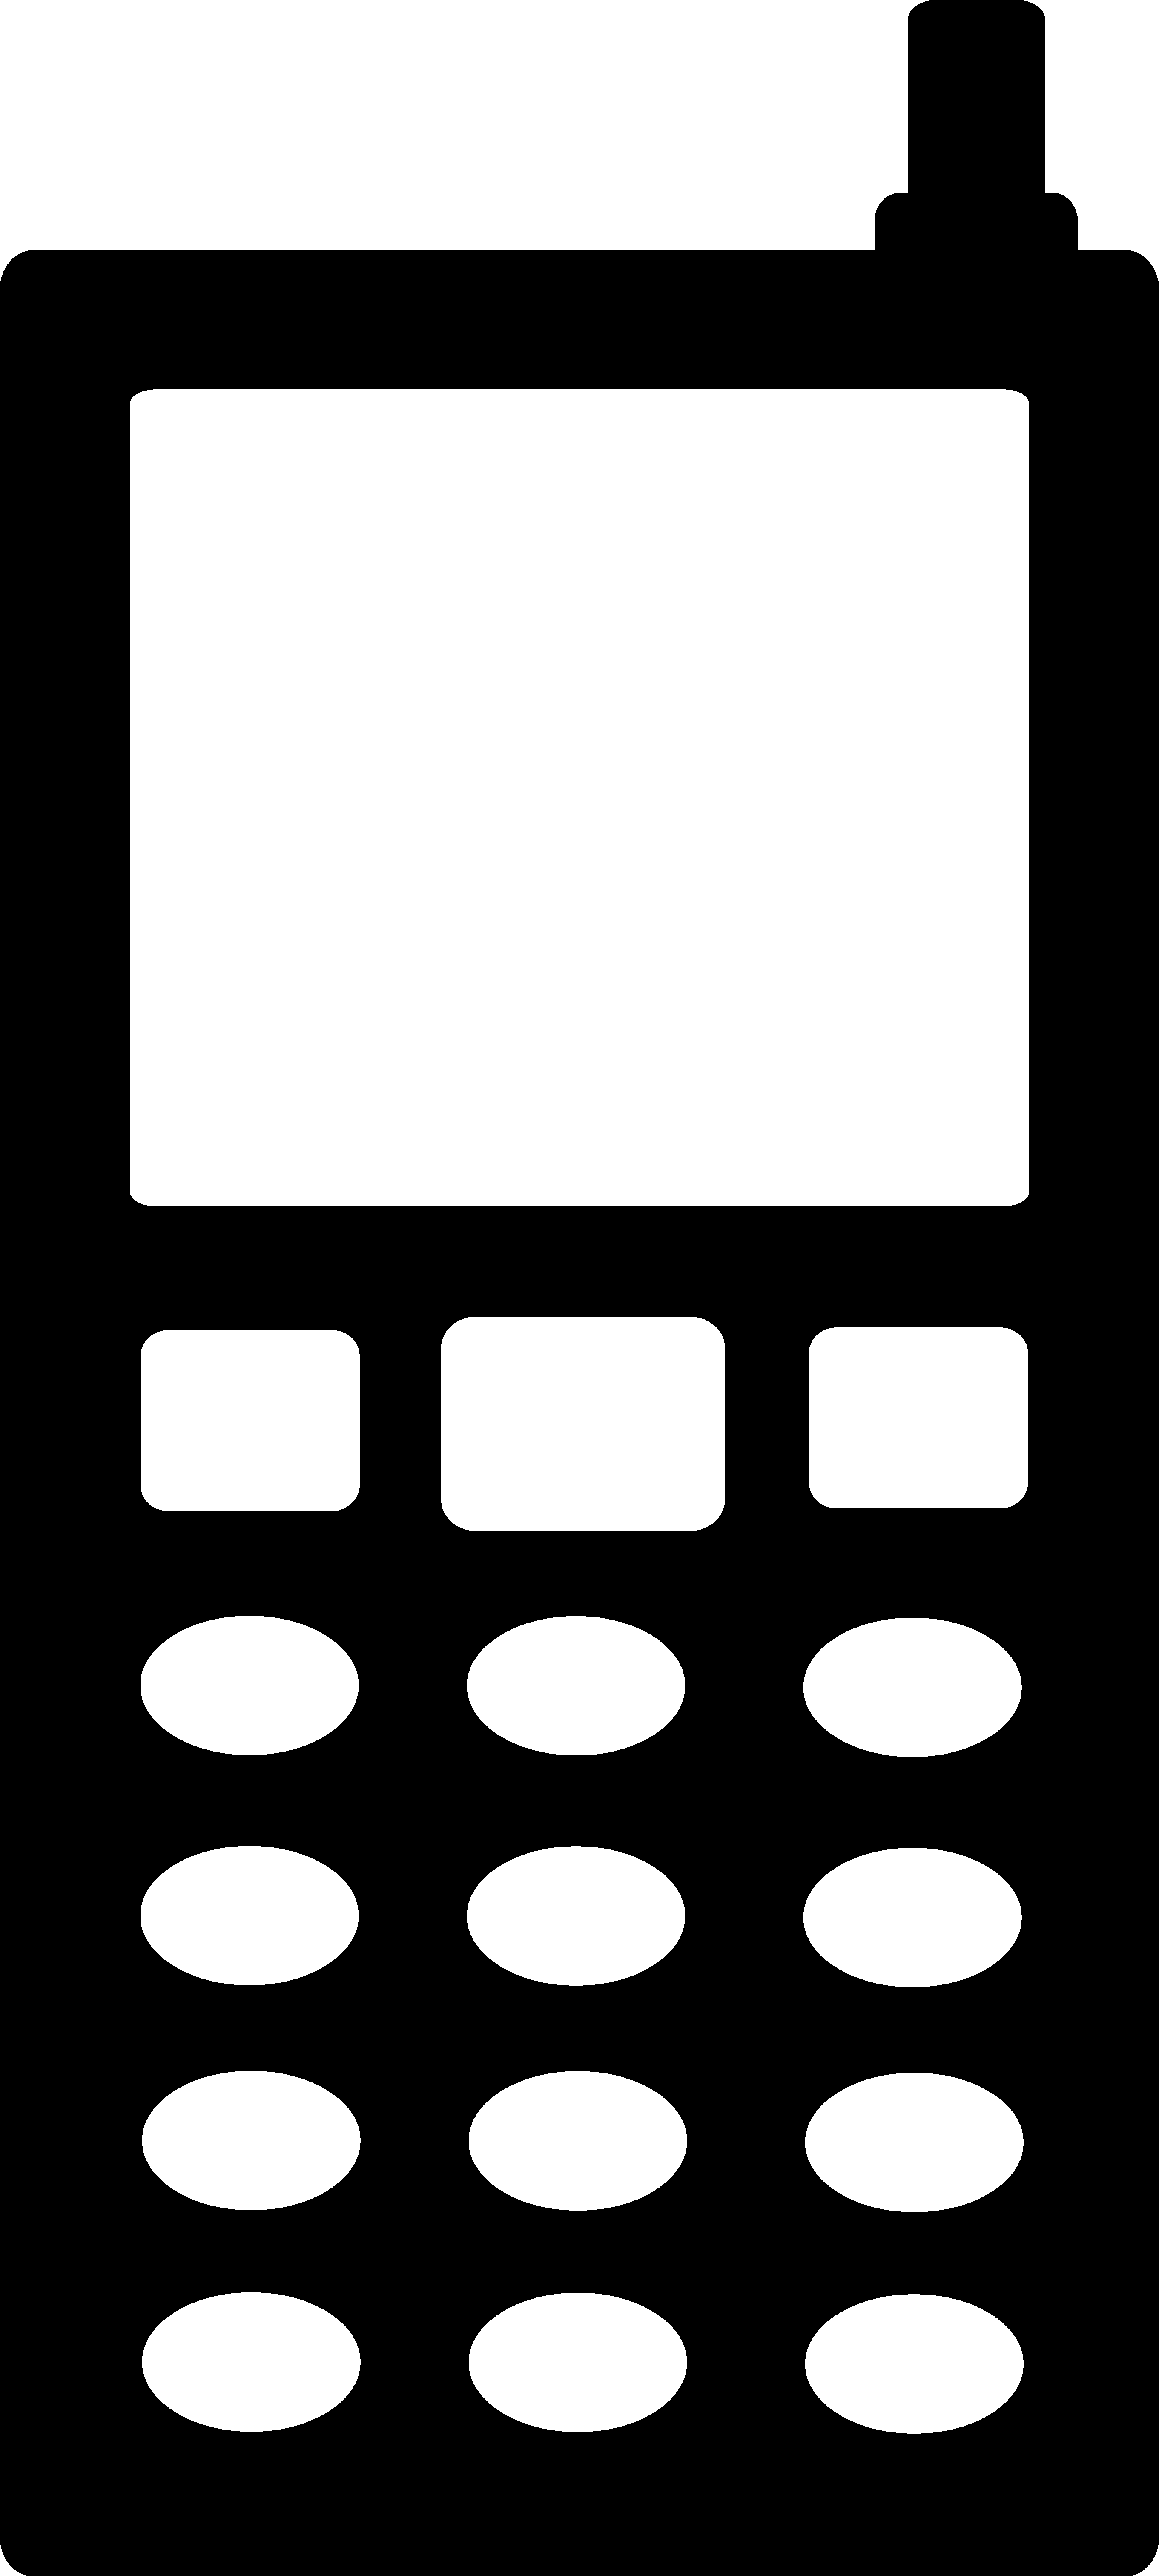 Telephone silhouette clipart black and white